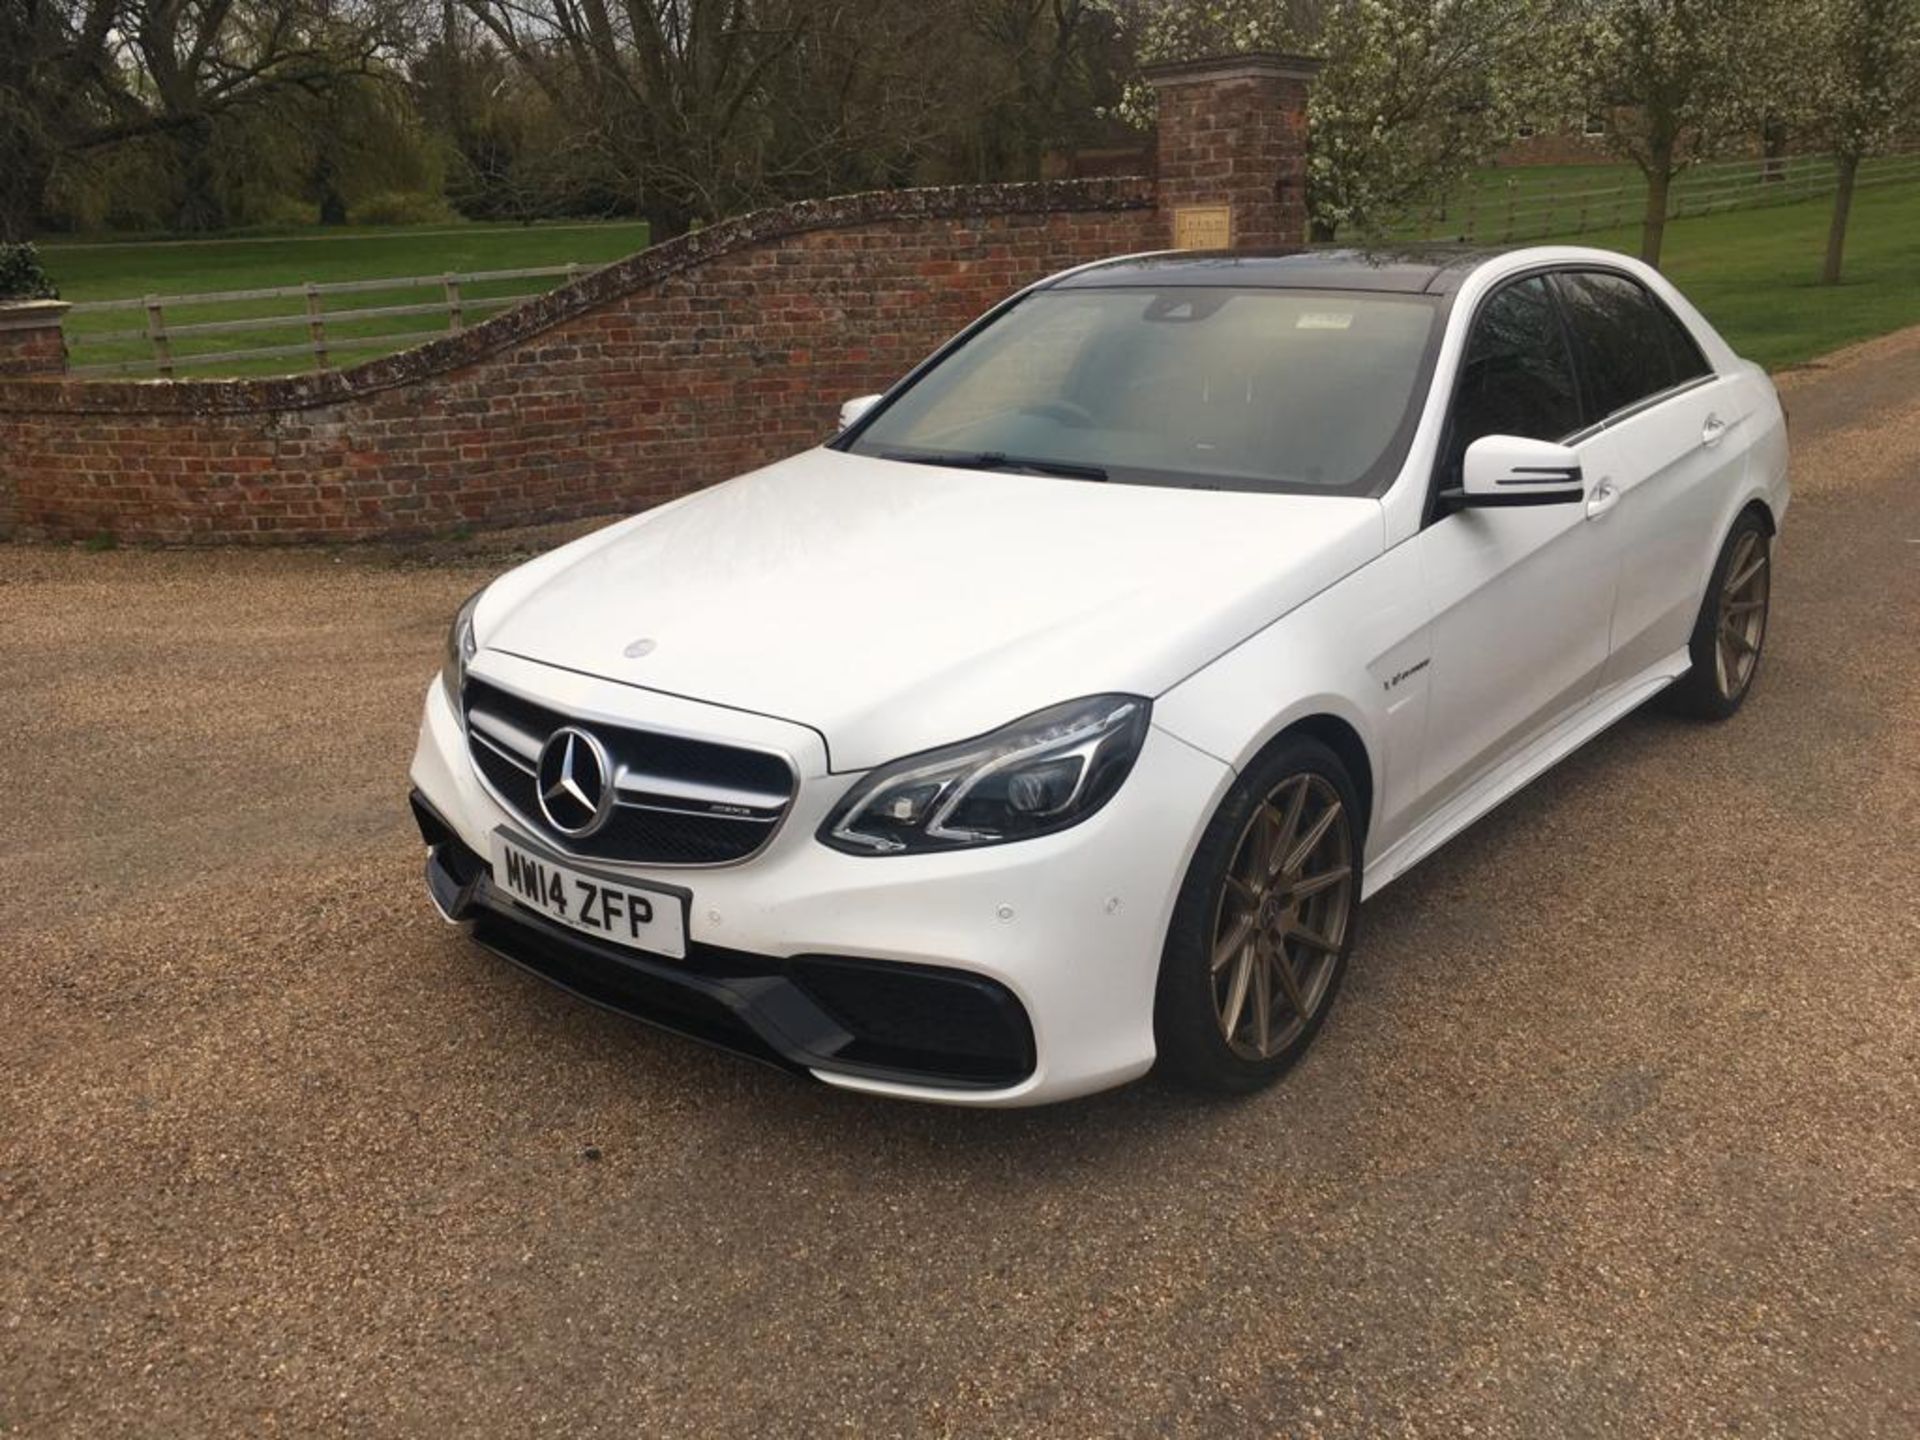 2014 MERCEDES BENZ E63 AMG SALOON AUTOMATIC **FULL MERCEDES BENZ SERVICE HISTORY** - Image 2 of 28